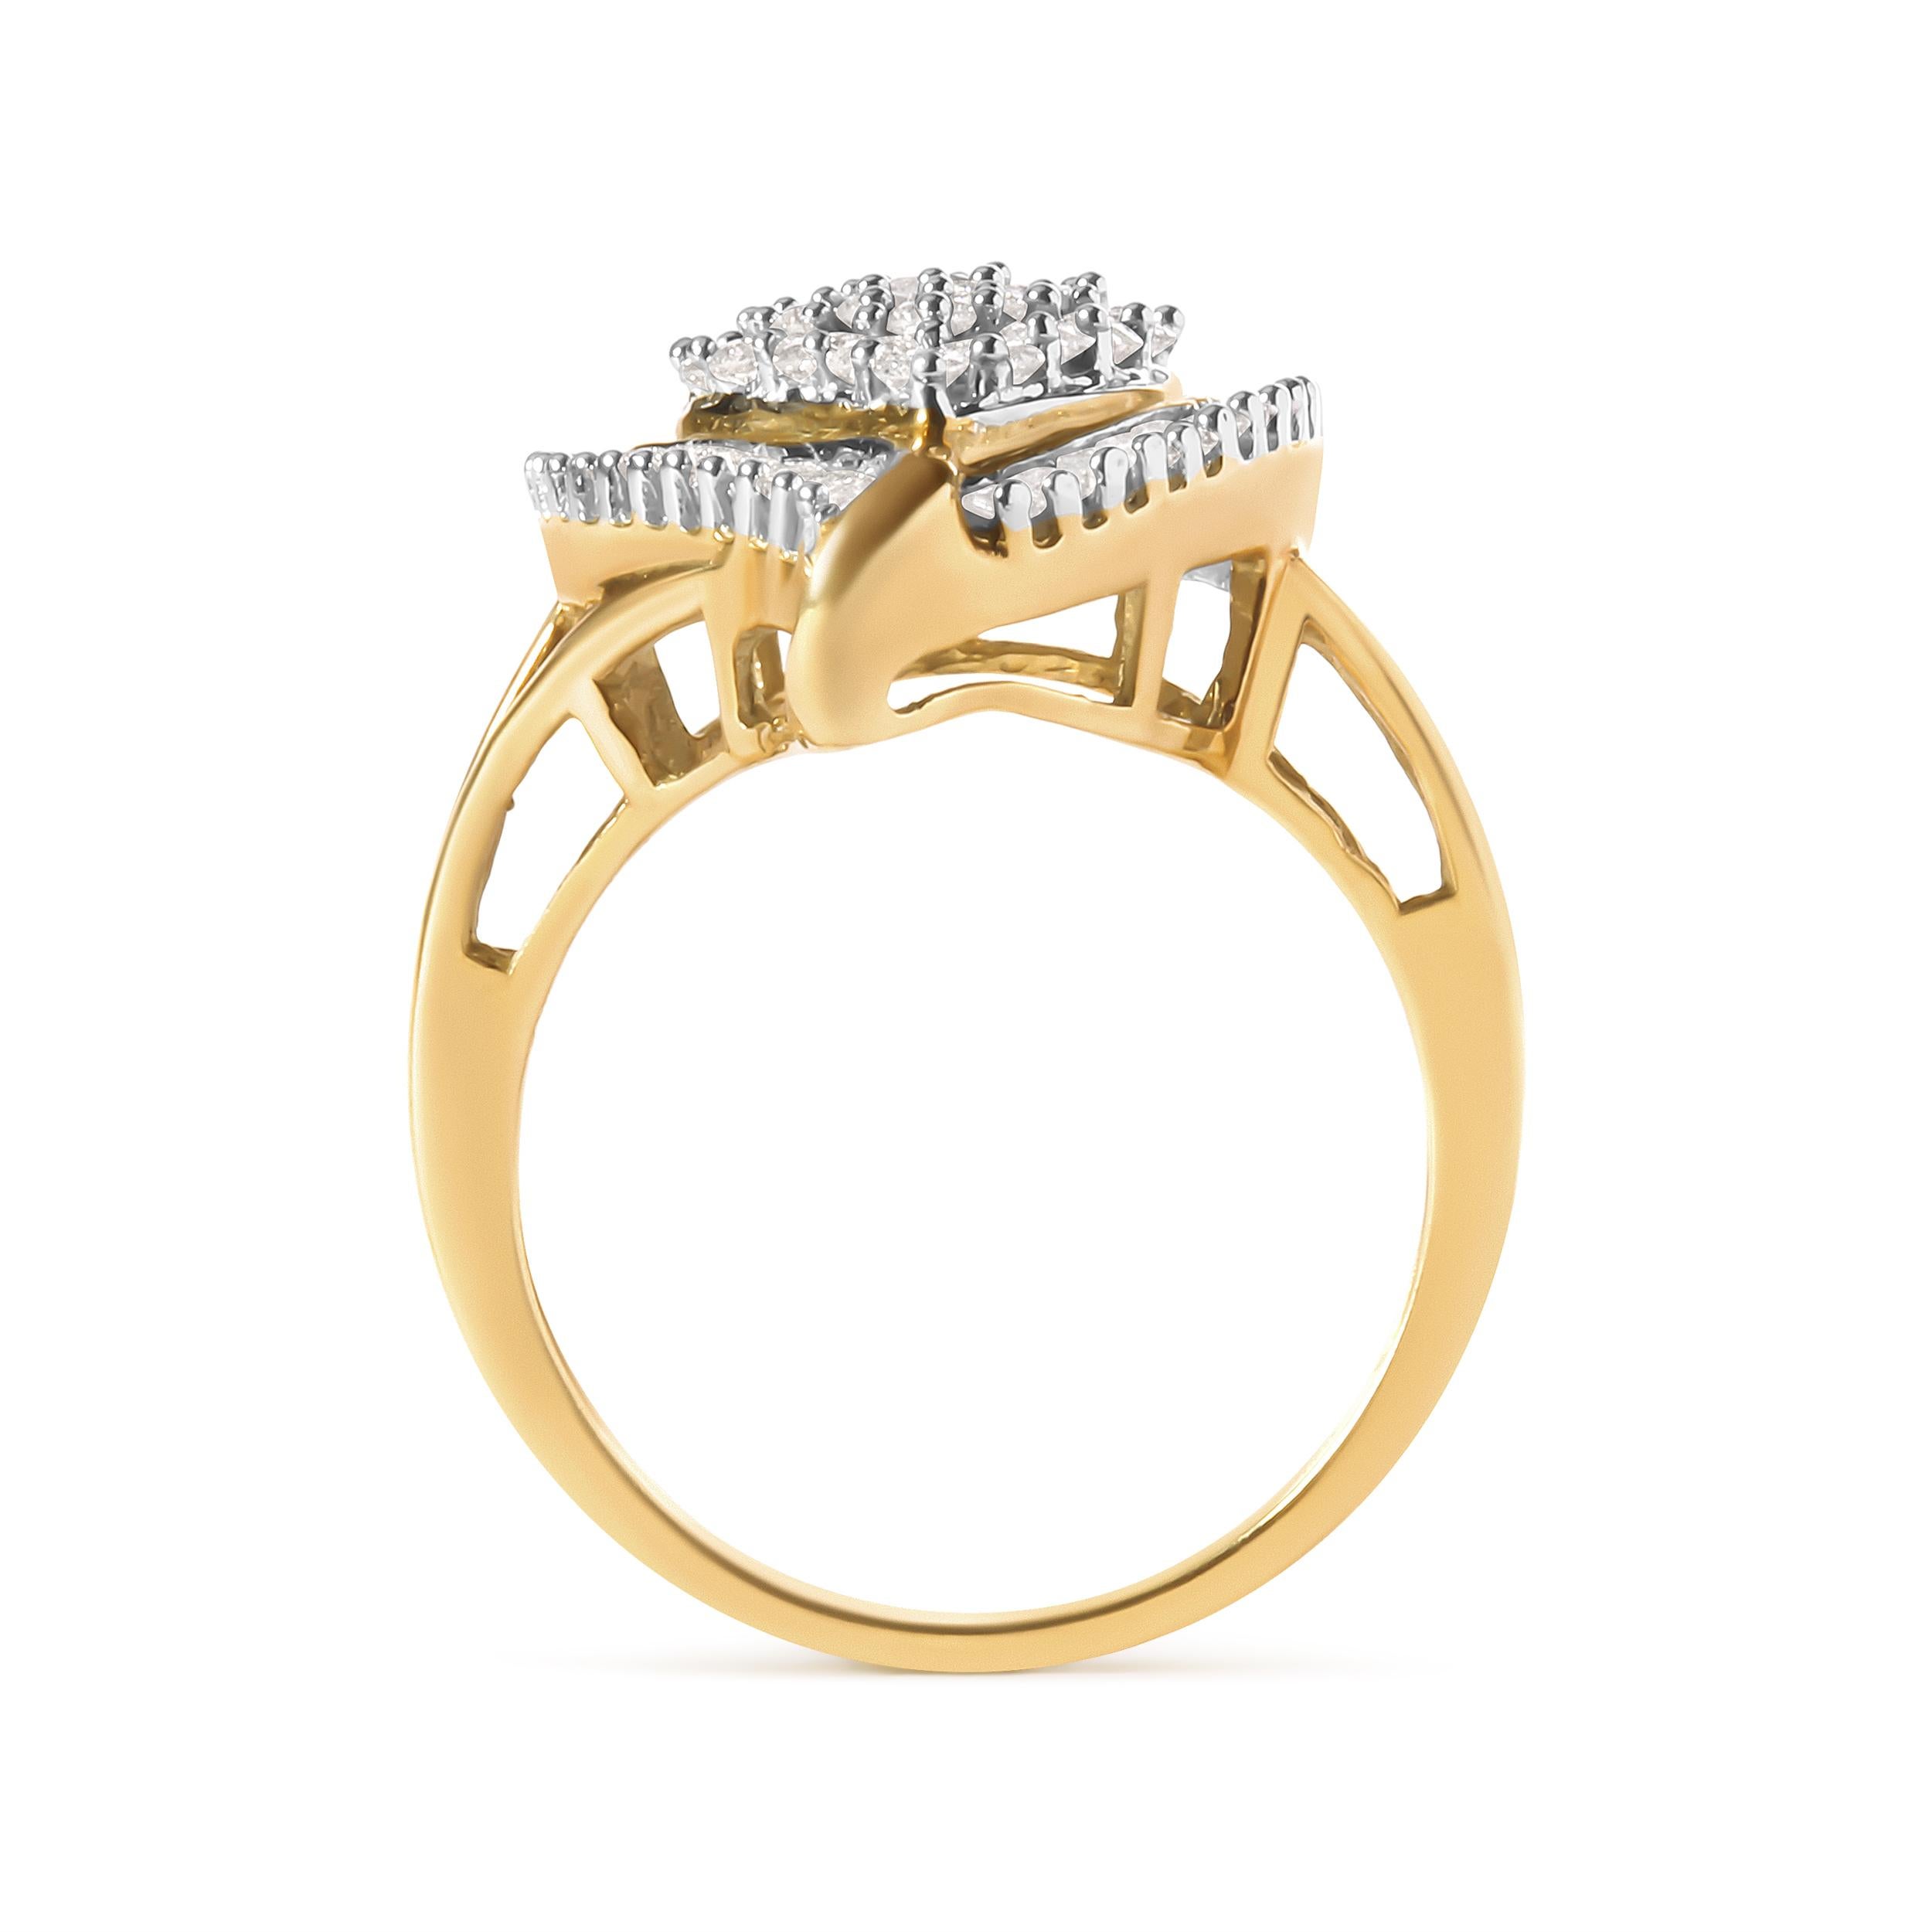 Indulge in the elegance of this 10K Yellow Gold Ballerina Cluster Ring, adorned with 66 natural diamonds totaling 1.0 cttw. The round and baguette cut diamonds are carefully prong set in a stunning ballerina design, creating a mesmerizing display of